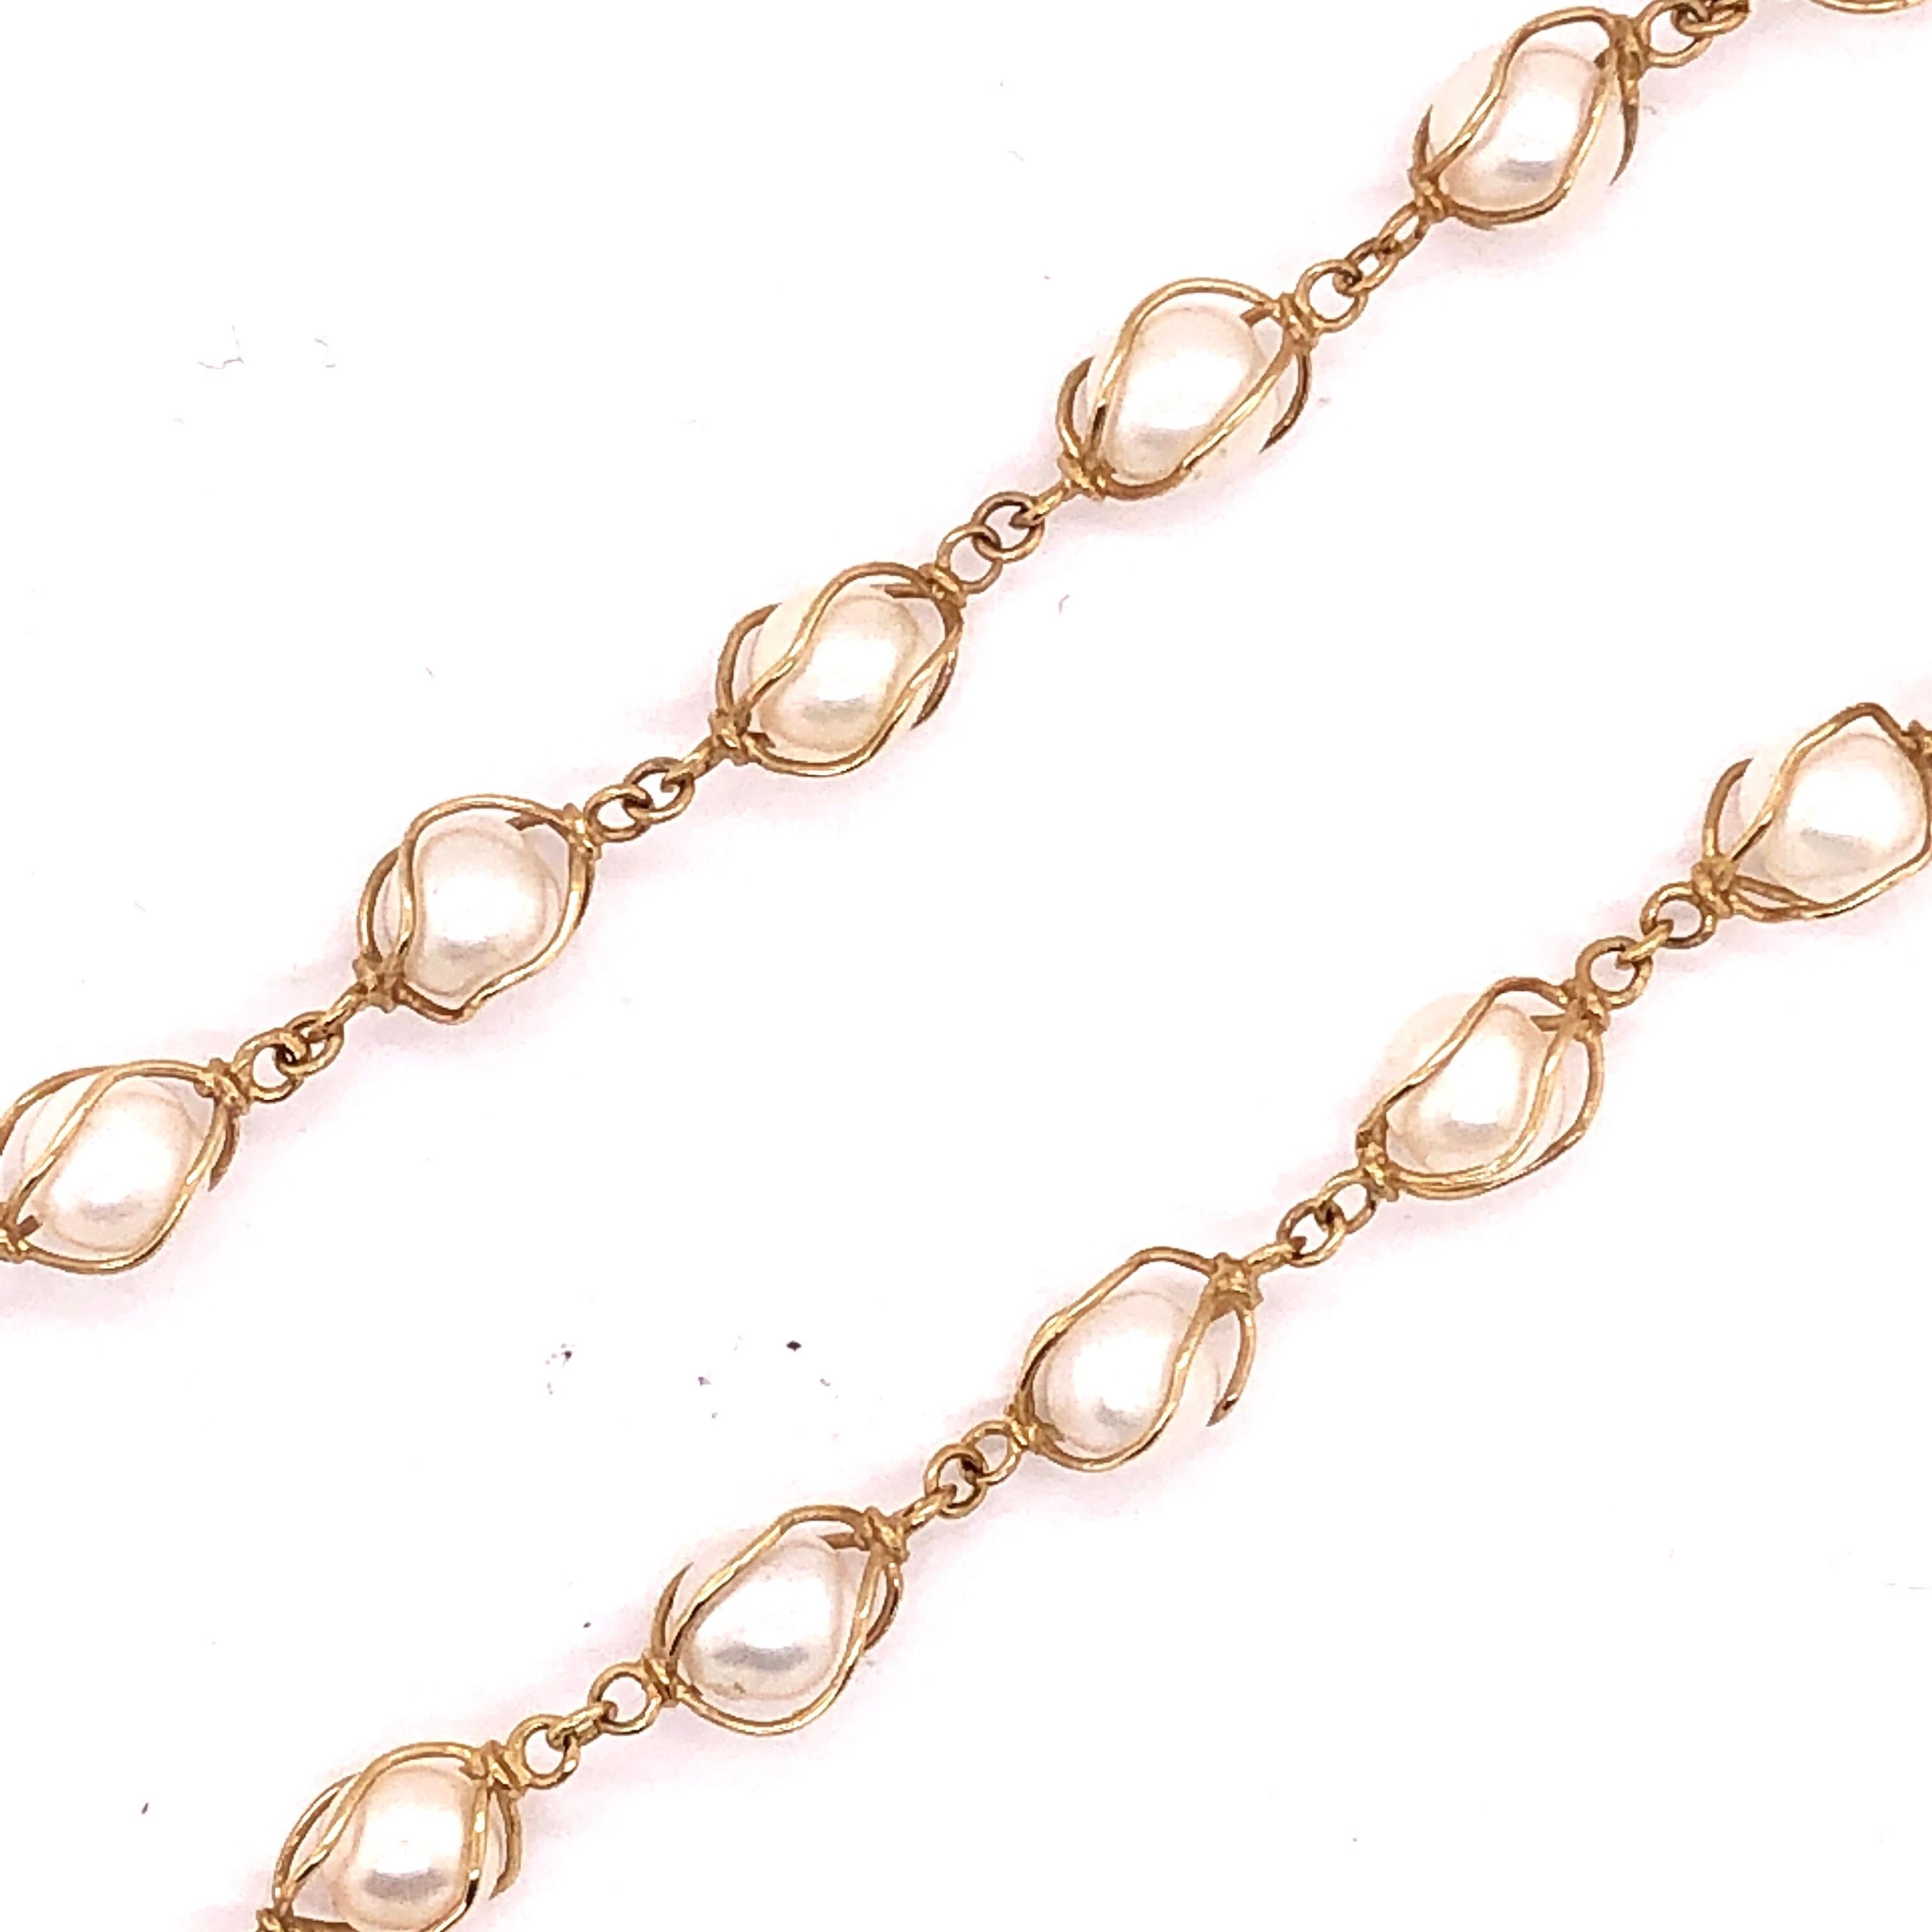 14 Karat Yellow Gold 14 inch Beaded Necklace. Stamped 585
13.23 grams total weight.